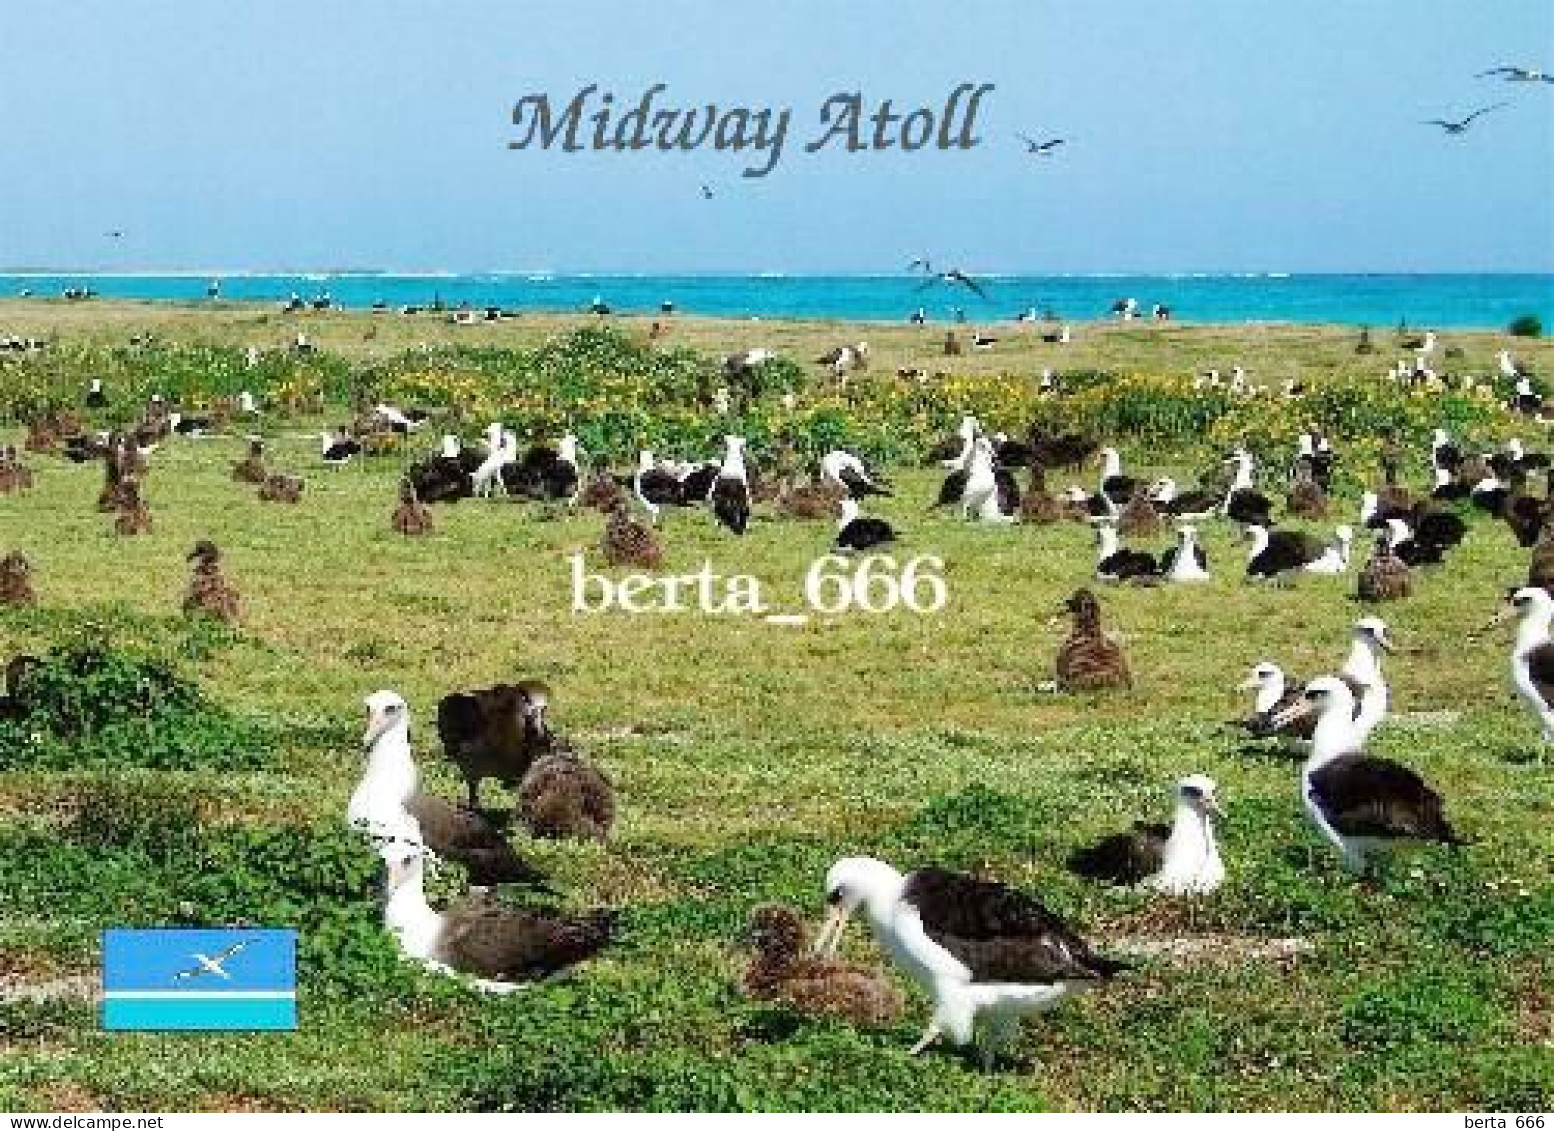 United States Midway Atoll Albatrosses New Postcard - Midway Islands